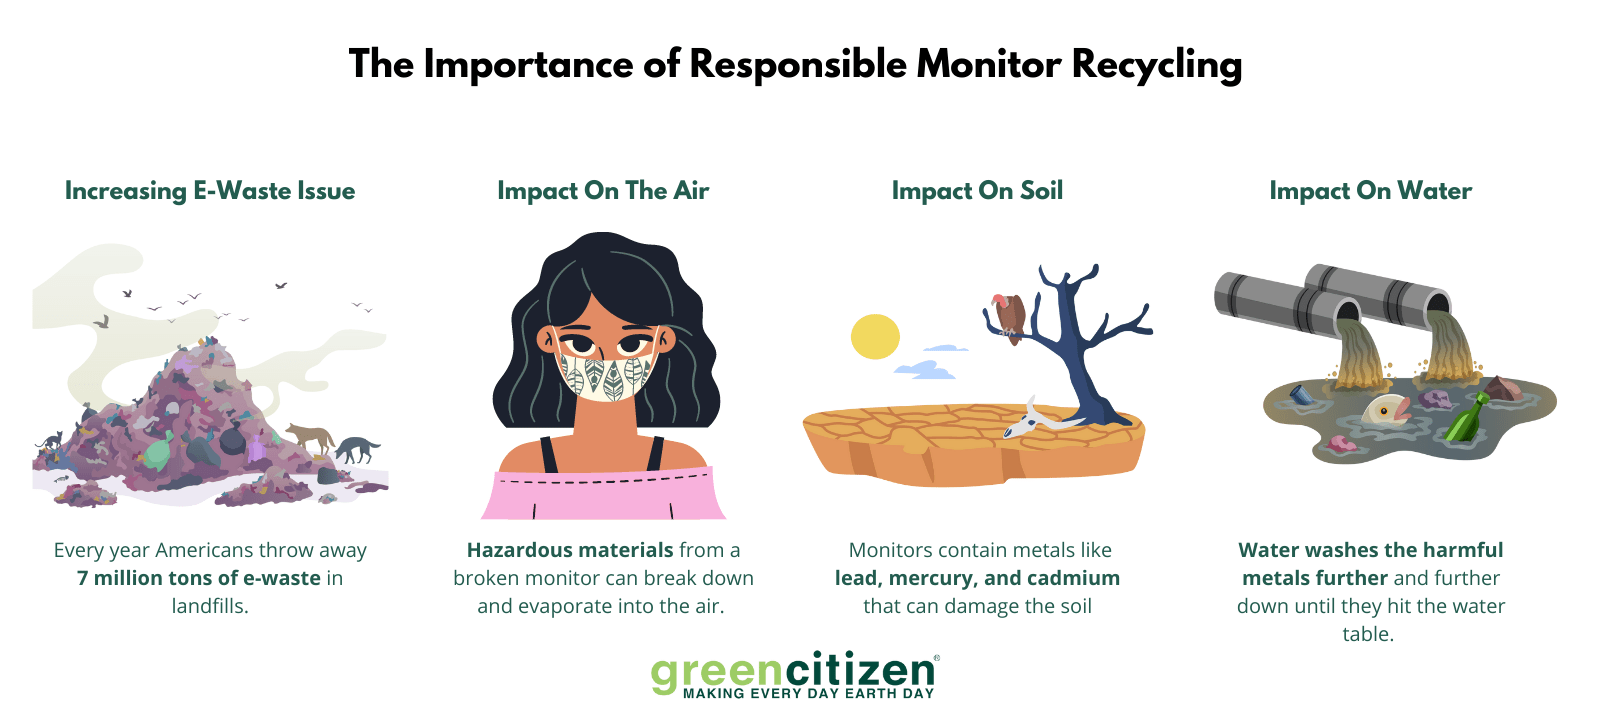 The Importance of Responsible Monitor Recycling